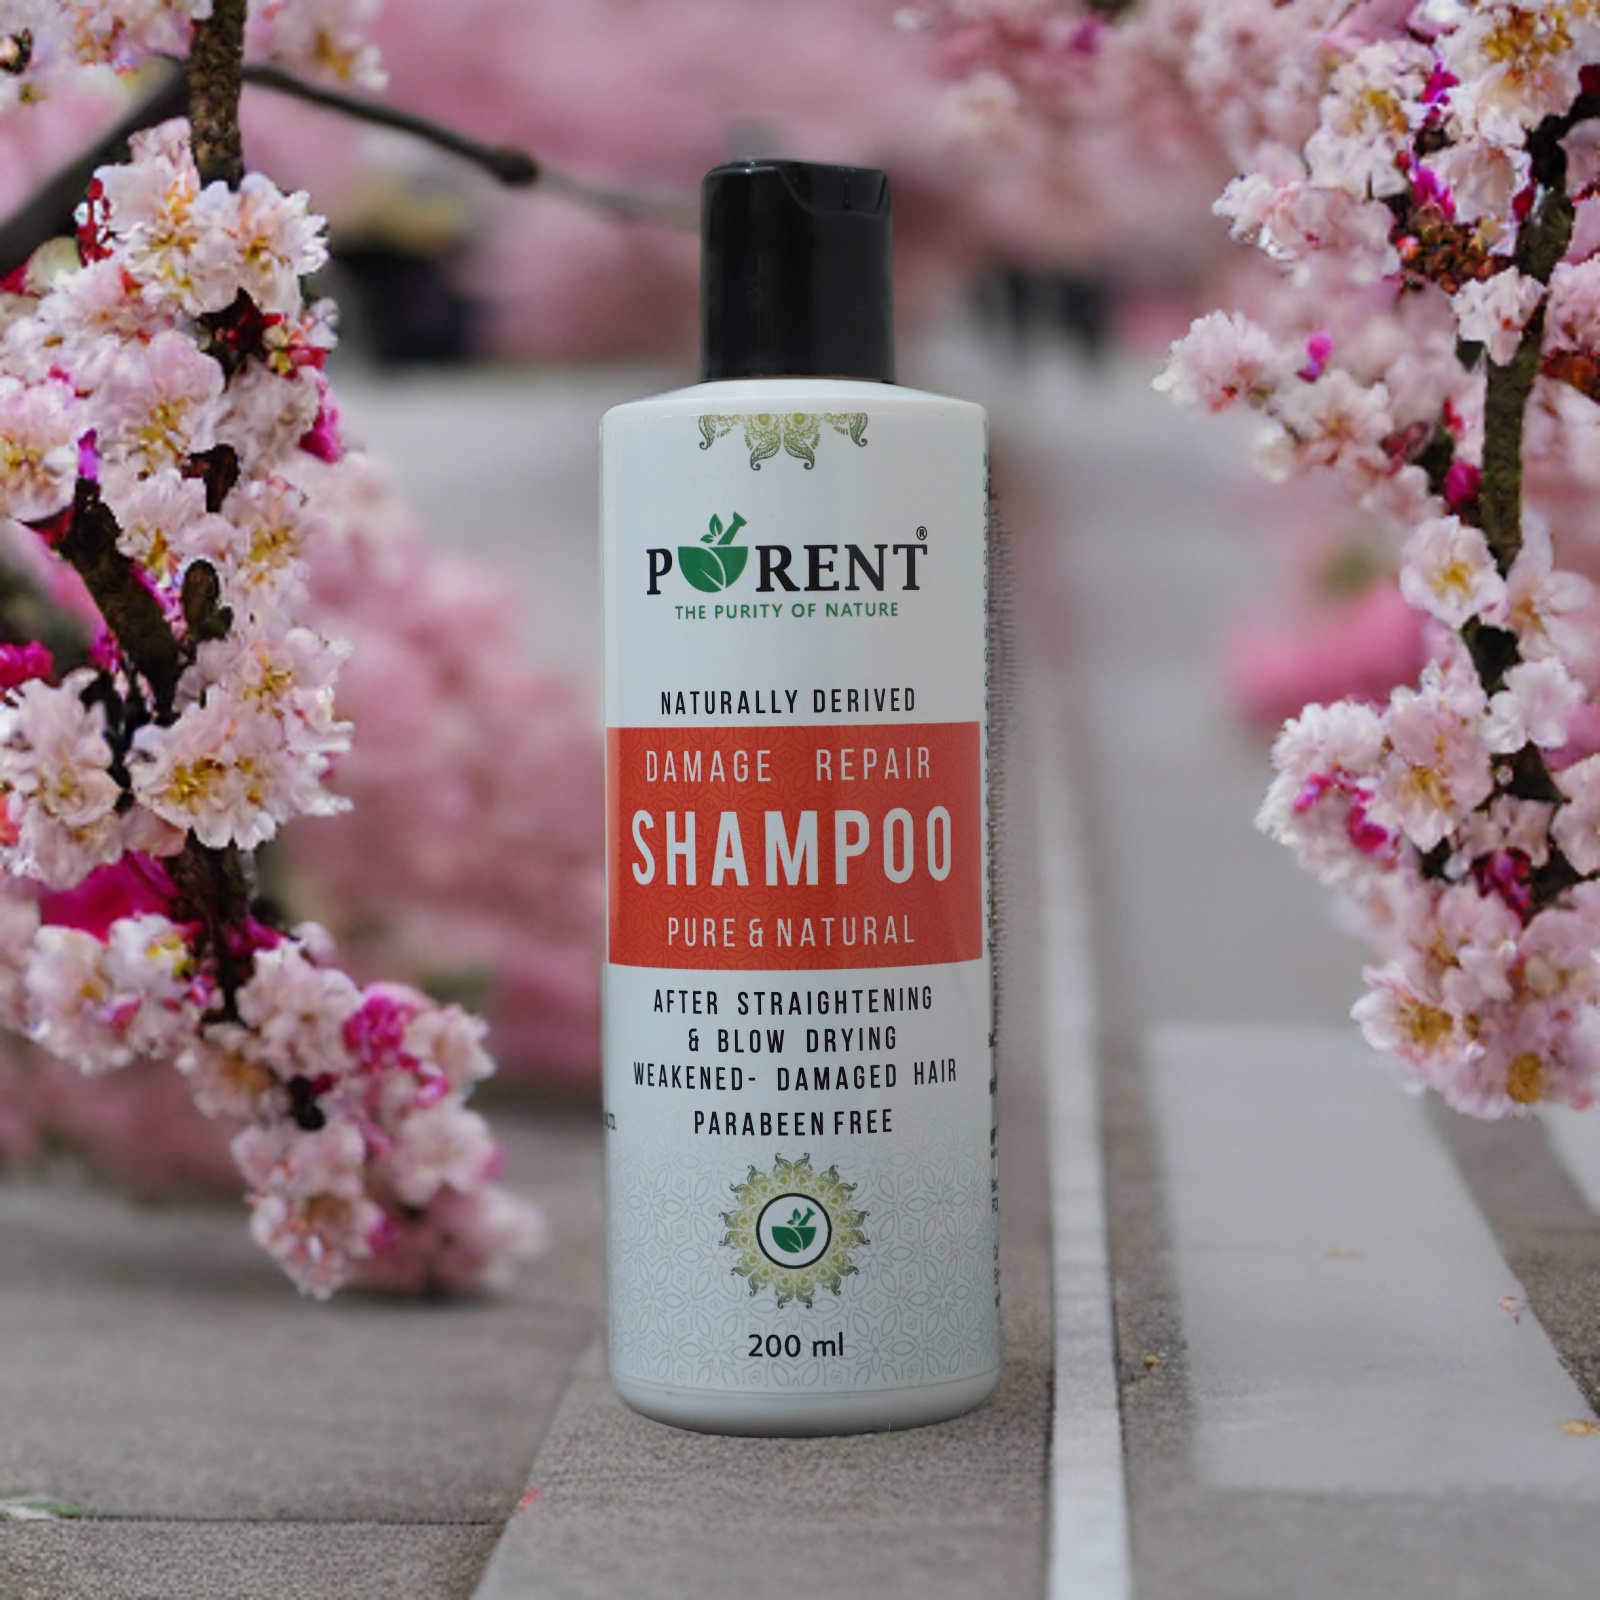 Formulated with a harmonious blend of herbal ingredients, our shampoo works to strengthen hair from within, targeting damaged areas and promoting overall resilience. Free from harsh chemicals, our herbal elixir provides a gentle yet effective solution for those seeking a natural approach to hair care.